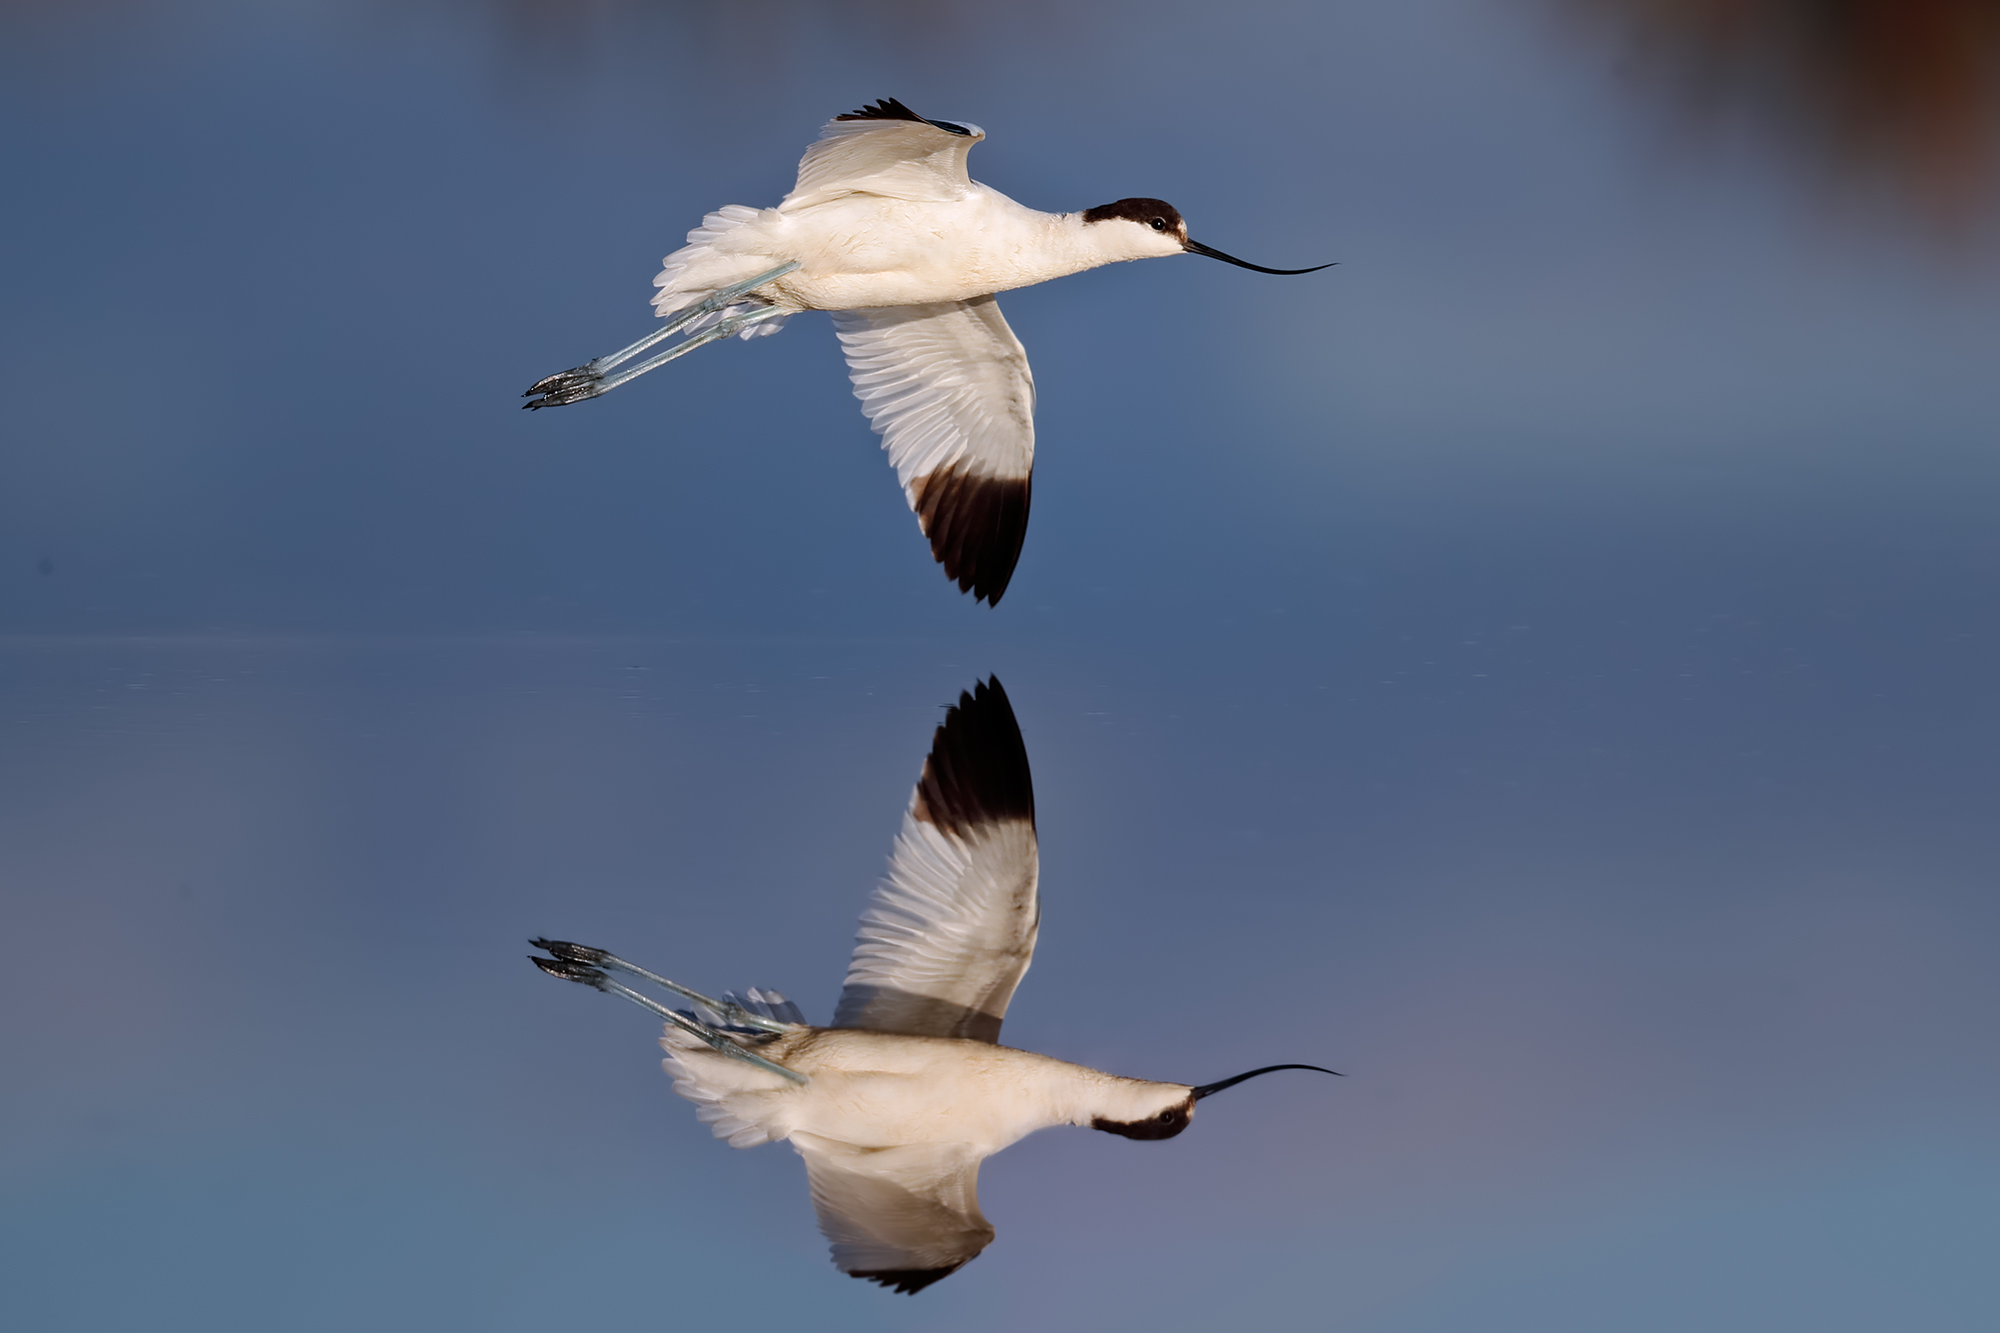 The avocet and its reflection...